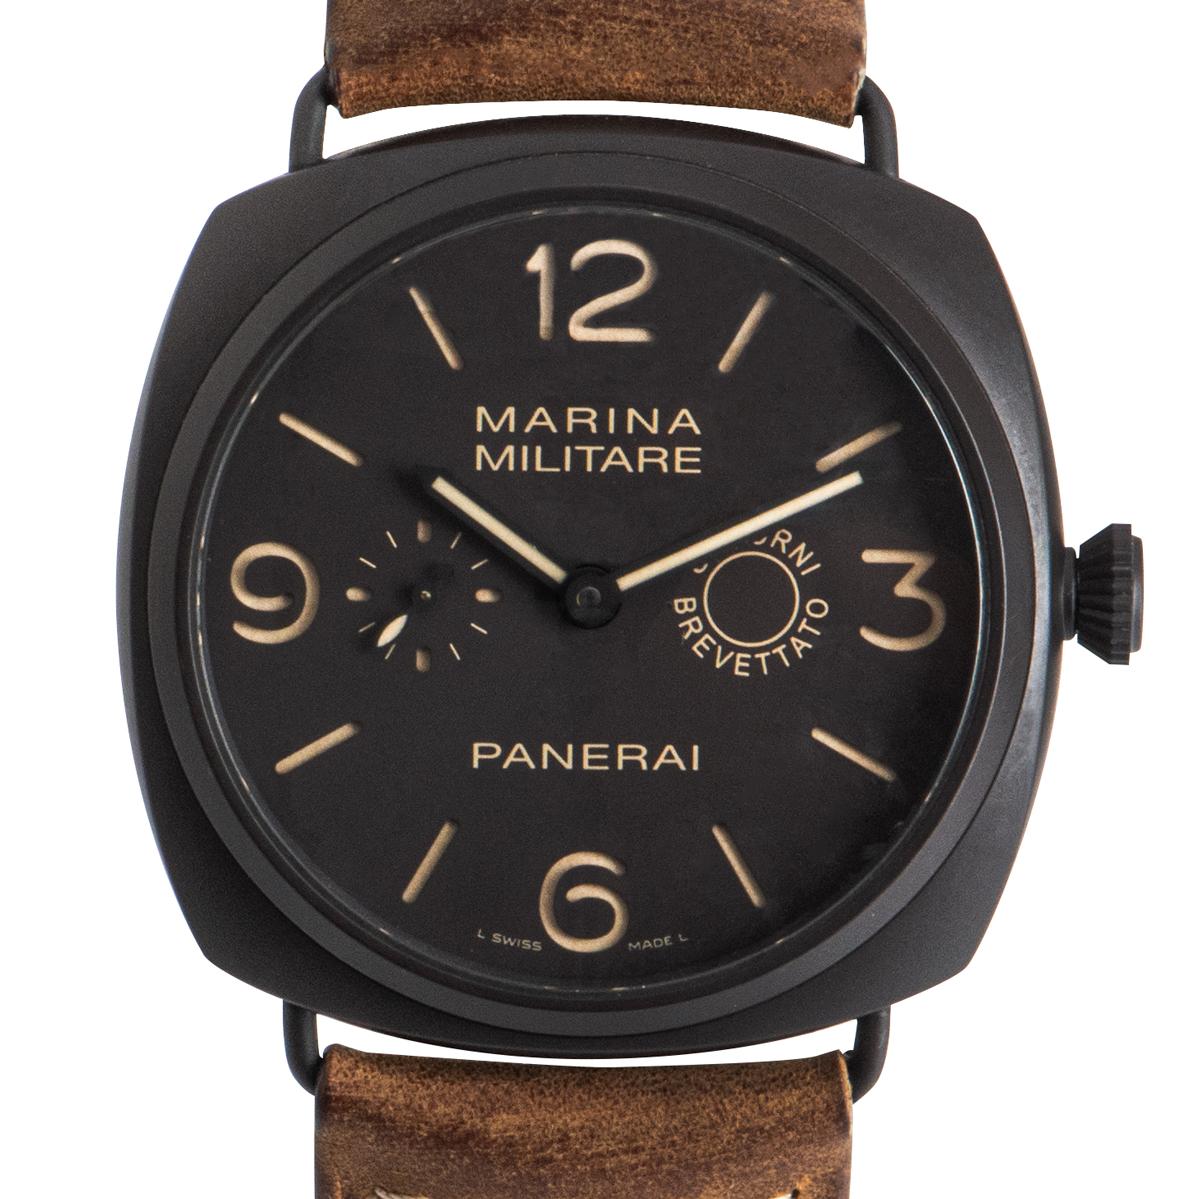 A Radiomir Composite Marina Militare 8 Giorni PAM00339 Gents Wristwatch, brown dial with arabic numbers and index batons, small seconds at 9 0'clock, brown calf leather strap with a composite pin buckle, sapphire glass, manual wind movement, 8 days